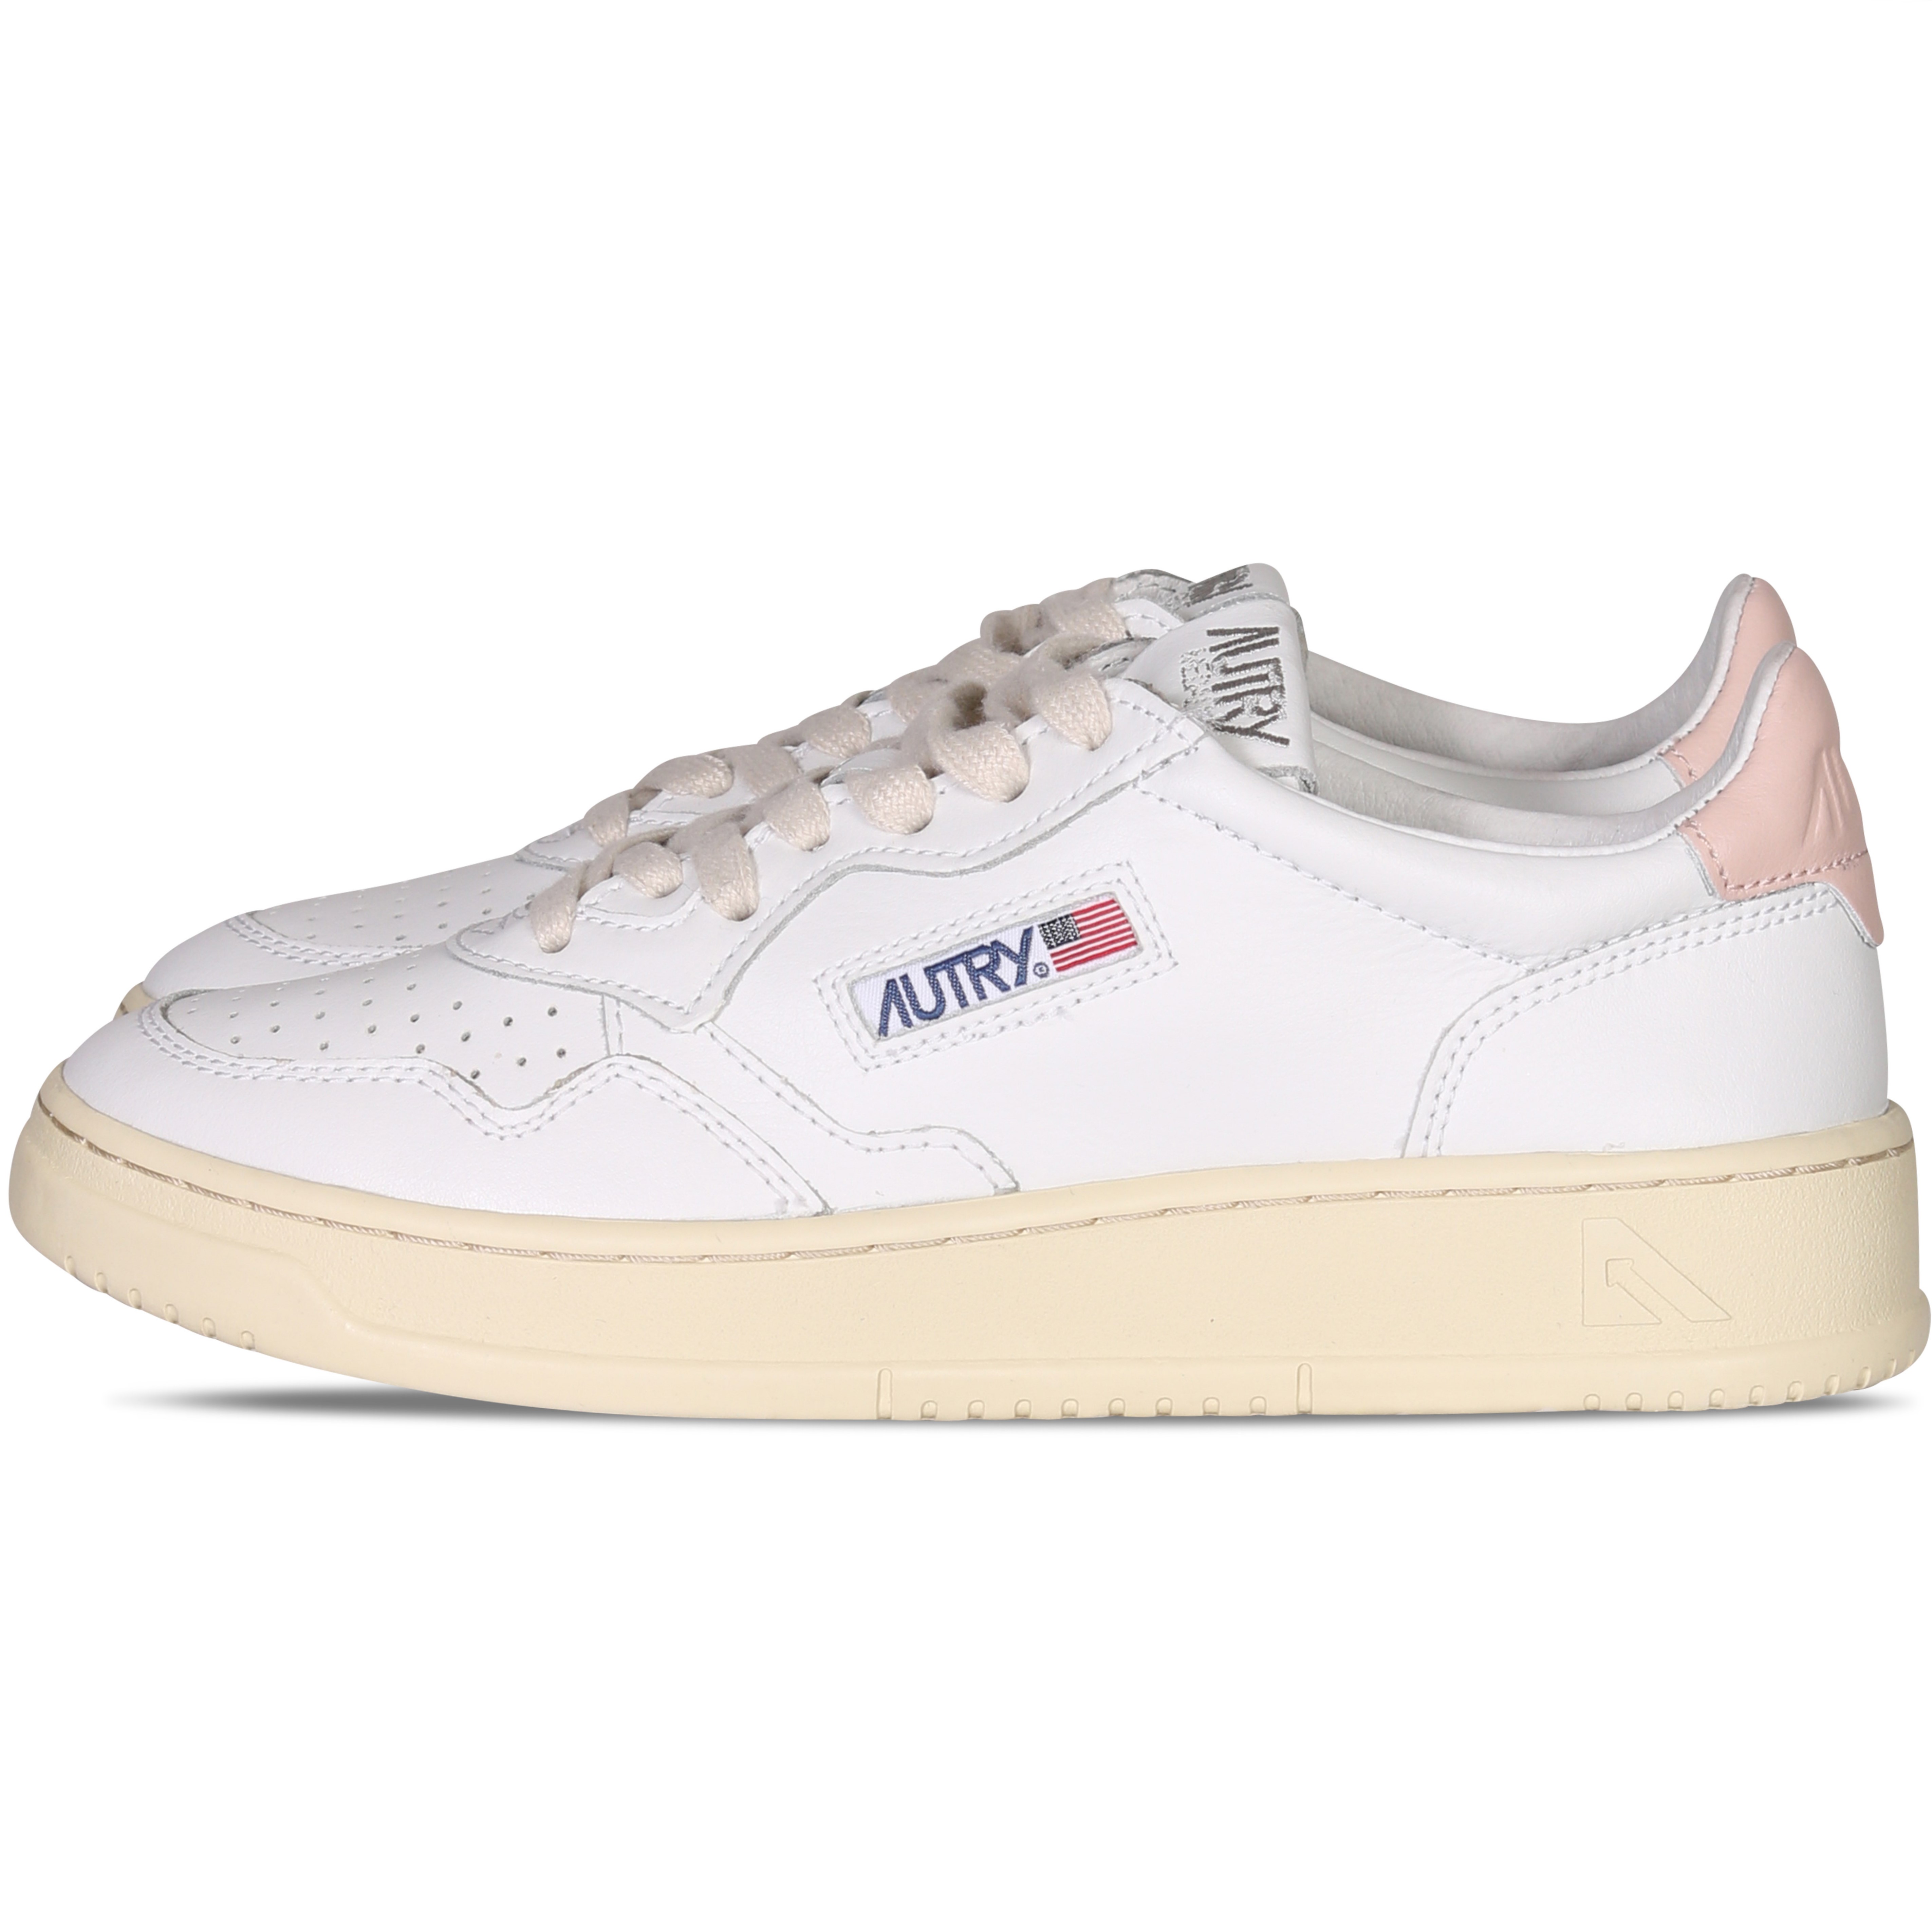 Autry Action Shoes Low Sneaker White/Pink 36